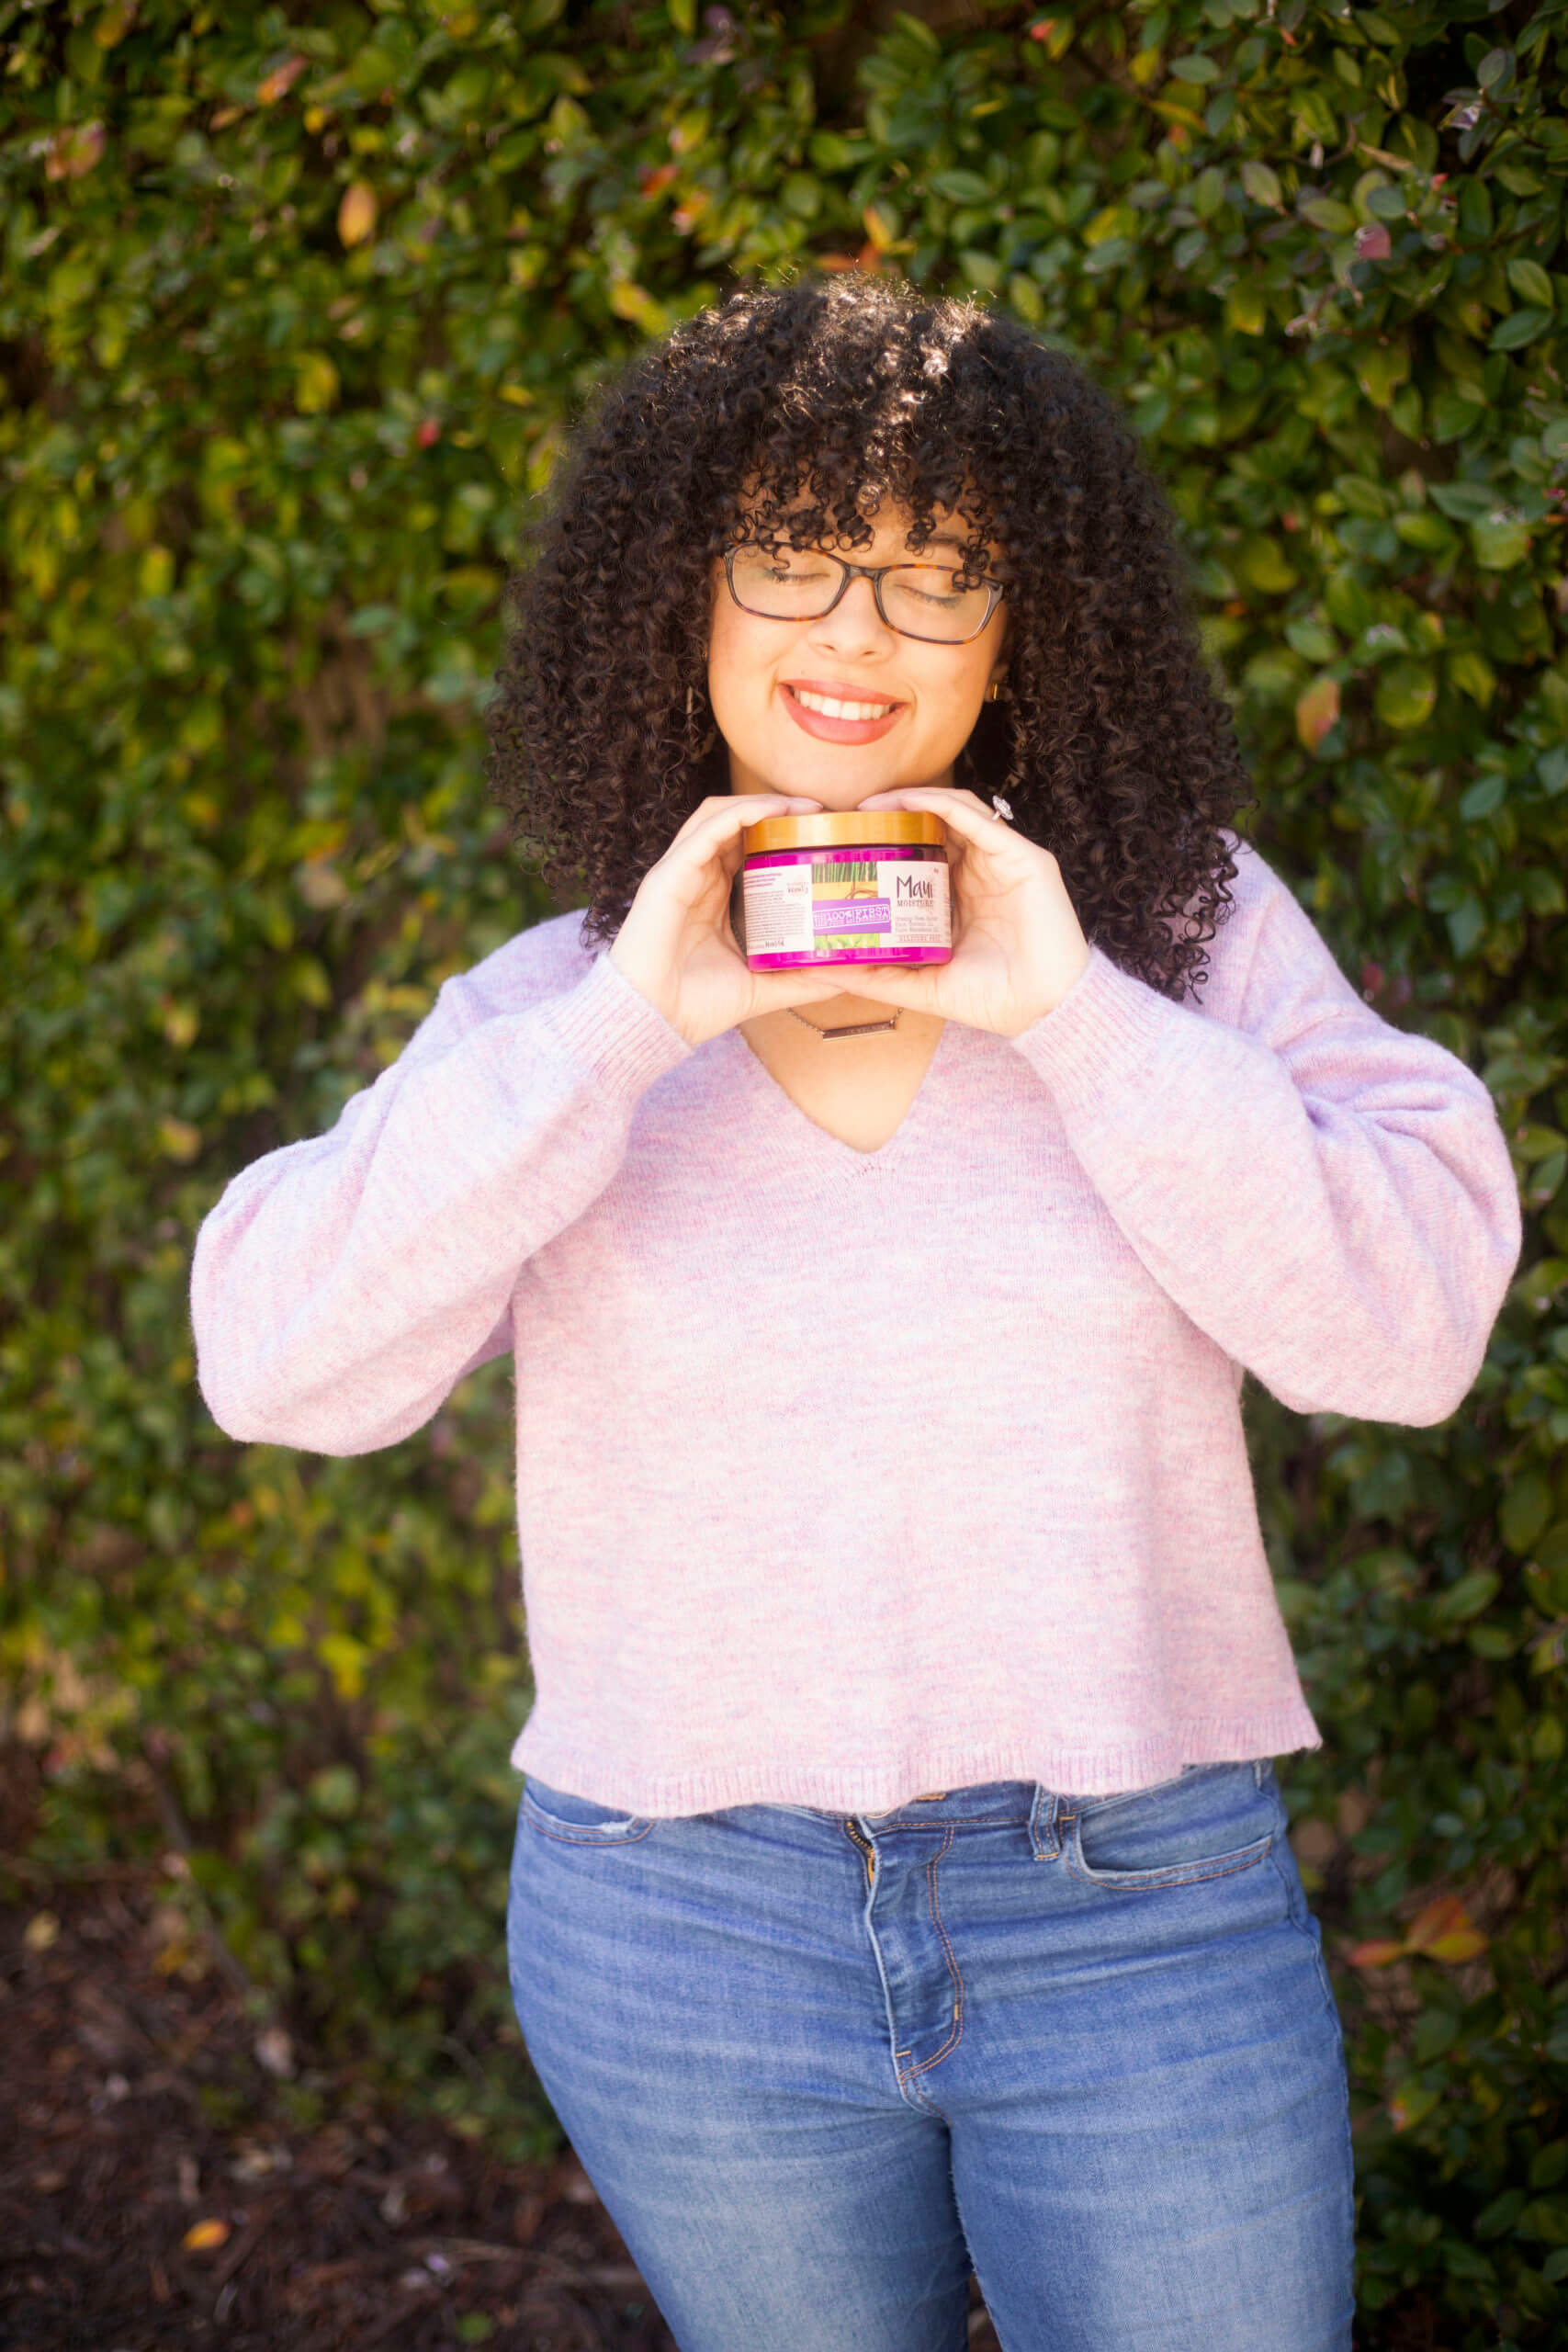 In today’s blog post, I’m sharing the true story about how I feel in love with my curly hair as well as my curly hair routine to help anyone in their natural journey. #AD Maui Moisture curly hair products are a go-to for me!